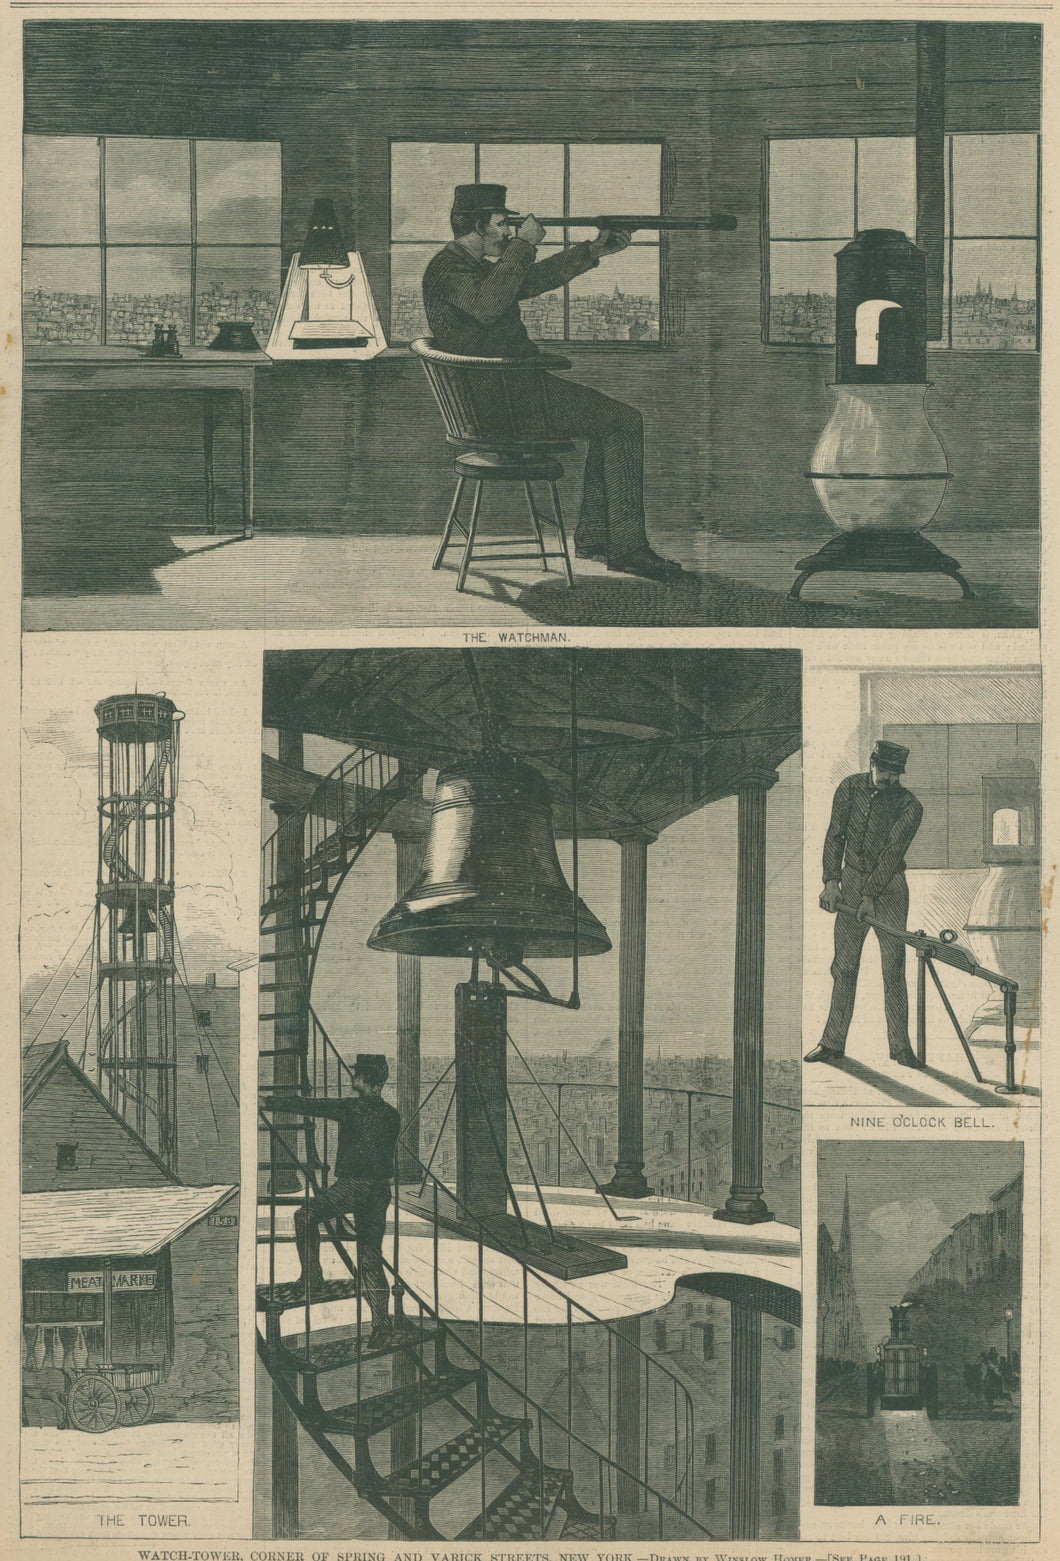 Homer, Winslow “Watch-Tower, Corner of Spring and Varick Streets, NY”